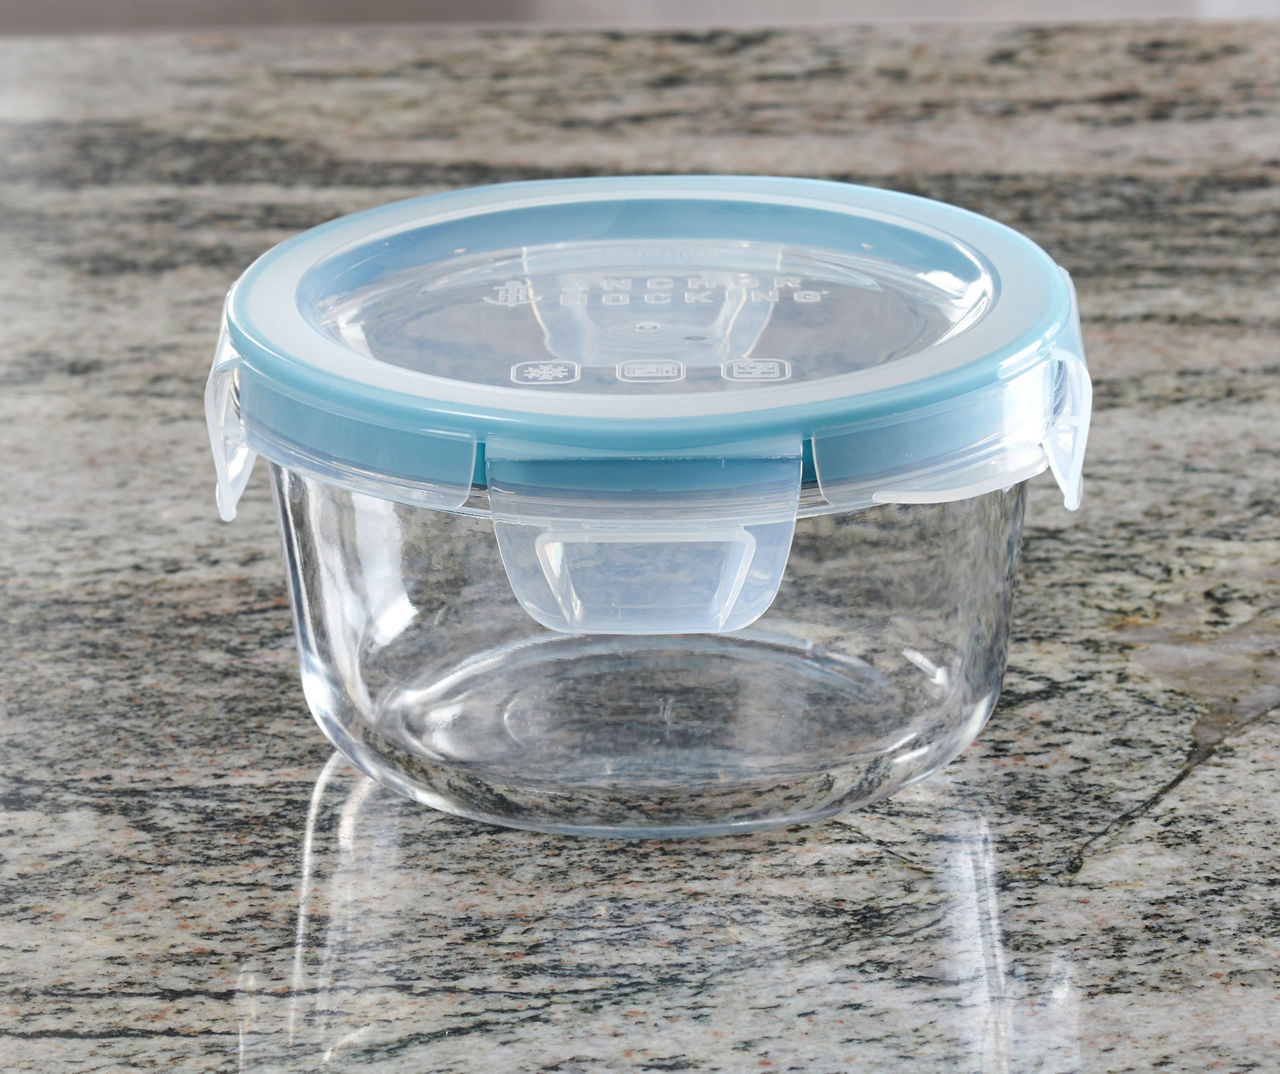 The Replacement Anchor Hocking Glass Storage Container Lid Hack They Don't  Want You to Know!